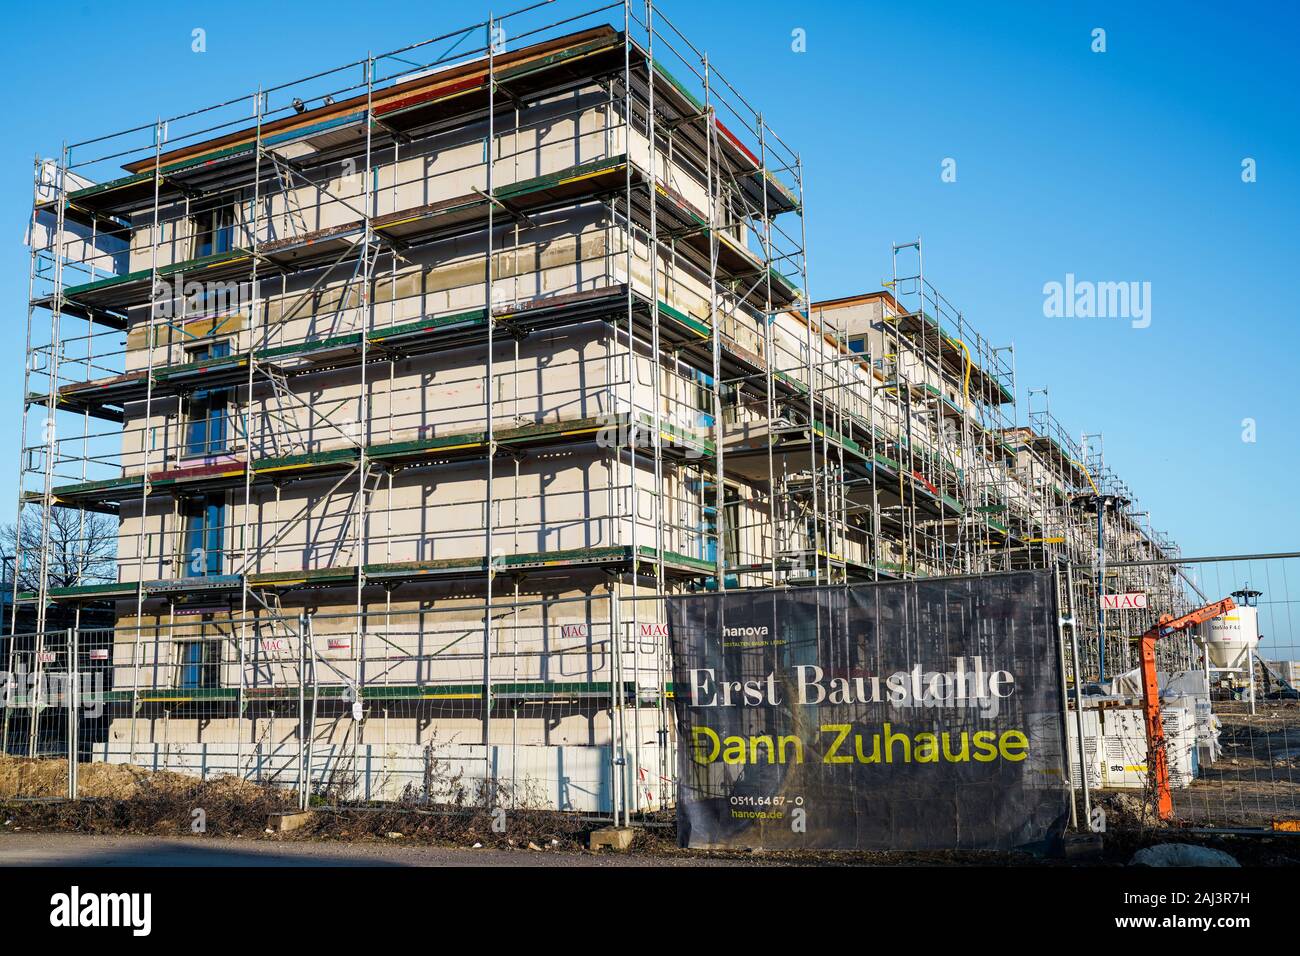 Hannover/Germany, New construction of rental apartments for the hanova housing association in Hanover, Germany. Kronsberg residential district at Oheriedentrift, January 2, 2020. Stock Photo